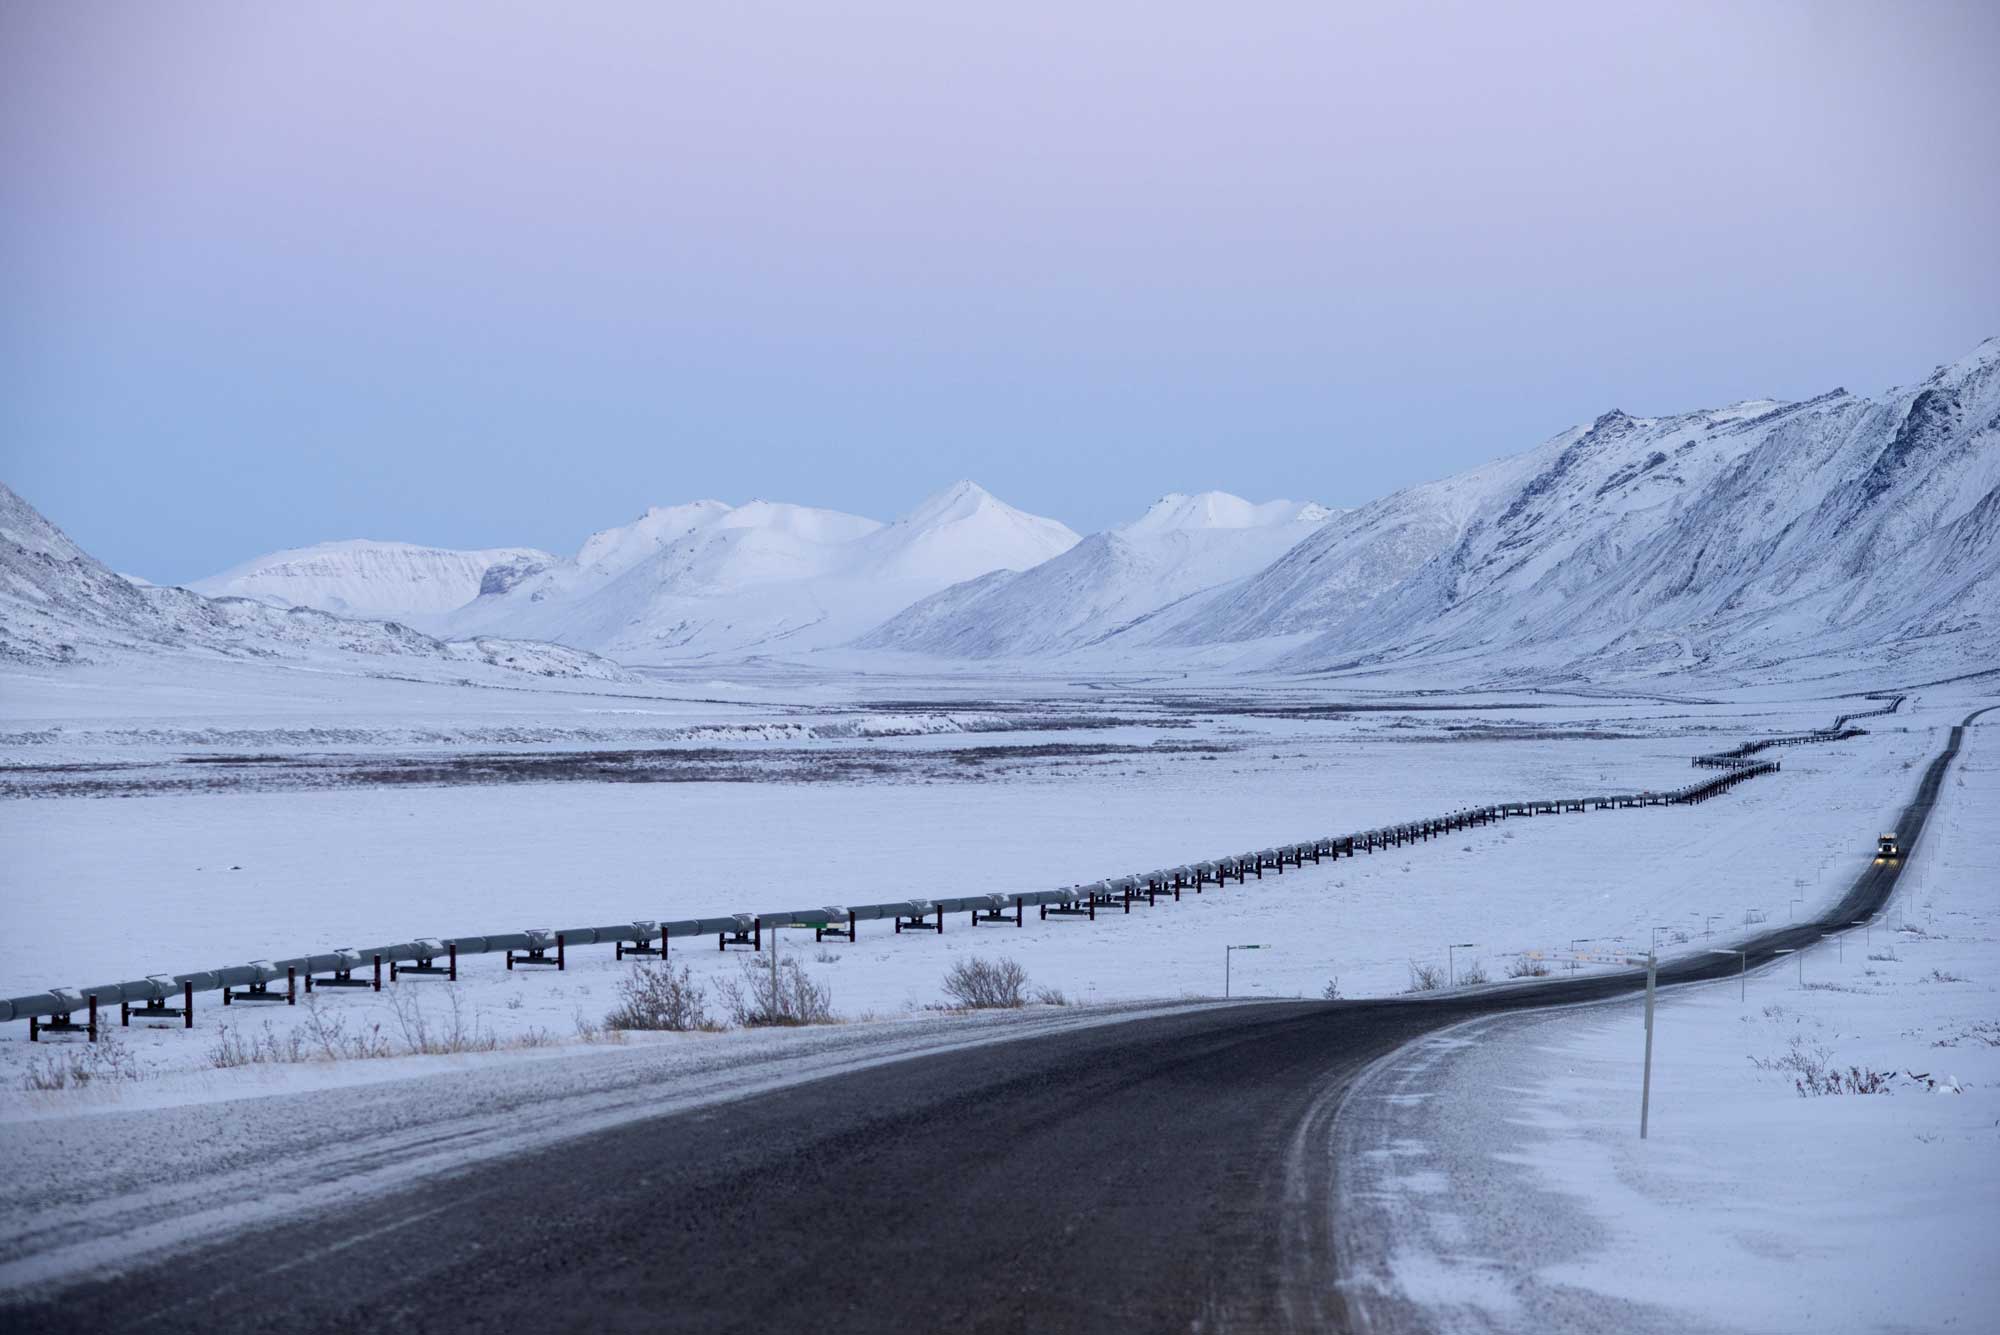 The Trans-Alaska Pipeline and the Dalton Highway, black lines against white snow, running parallel into icy mountains and lavender skies in the distance.